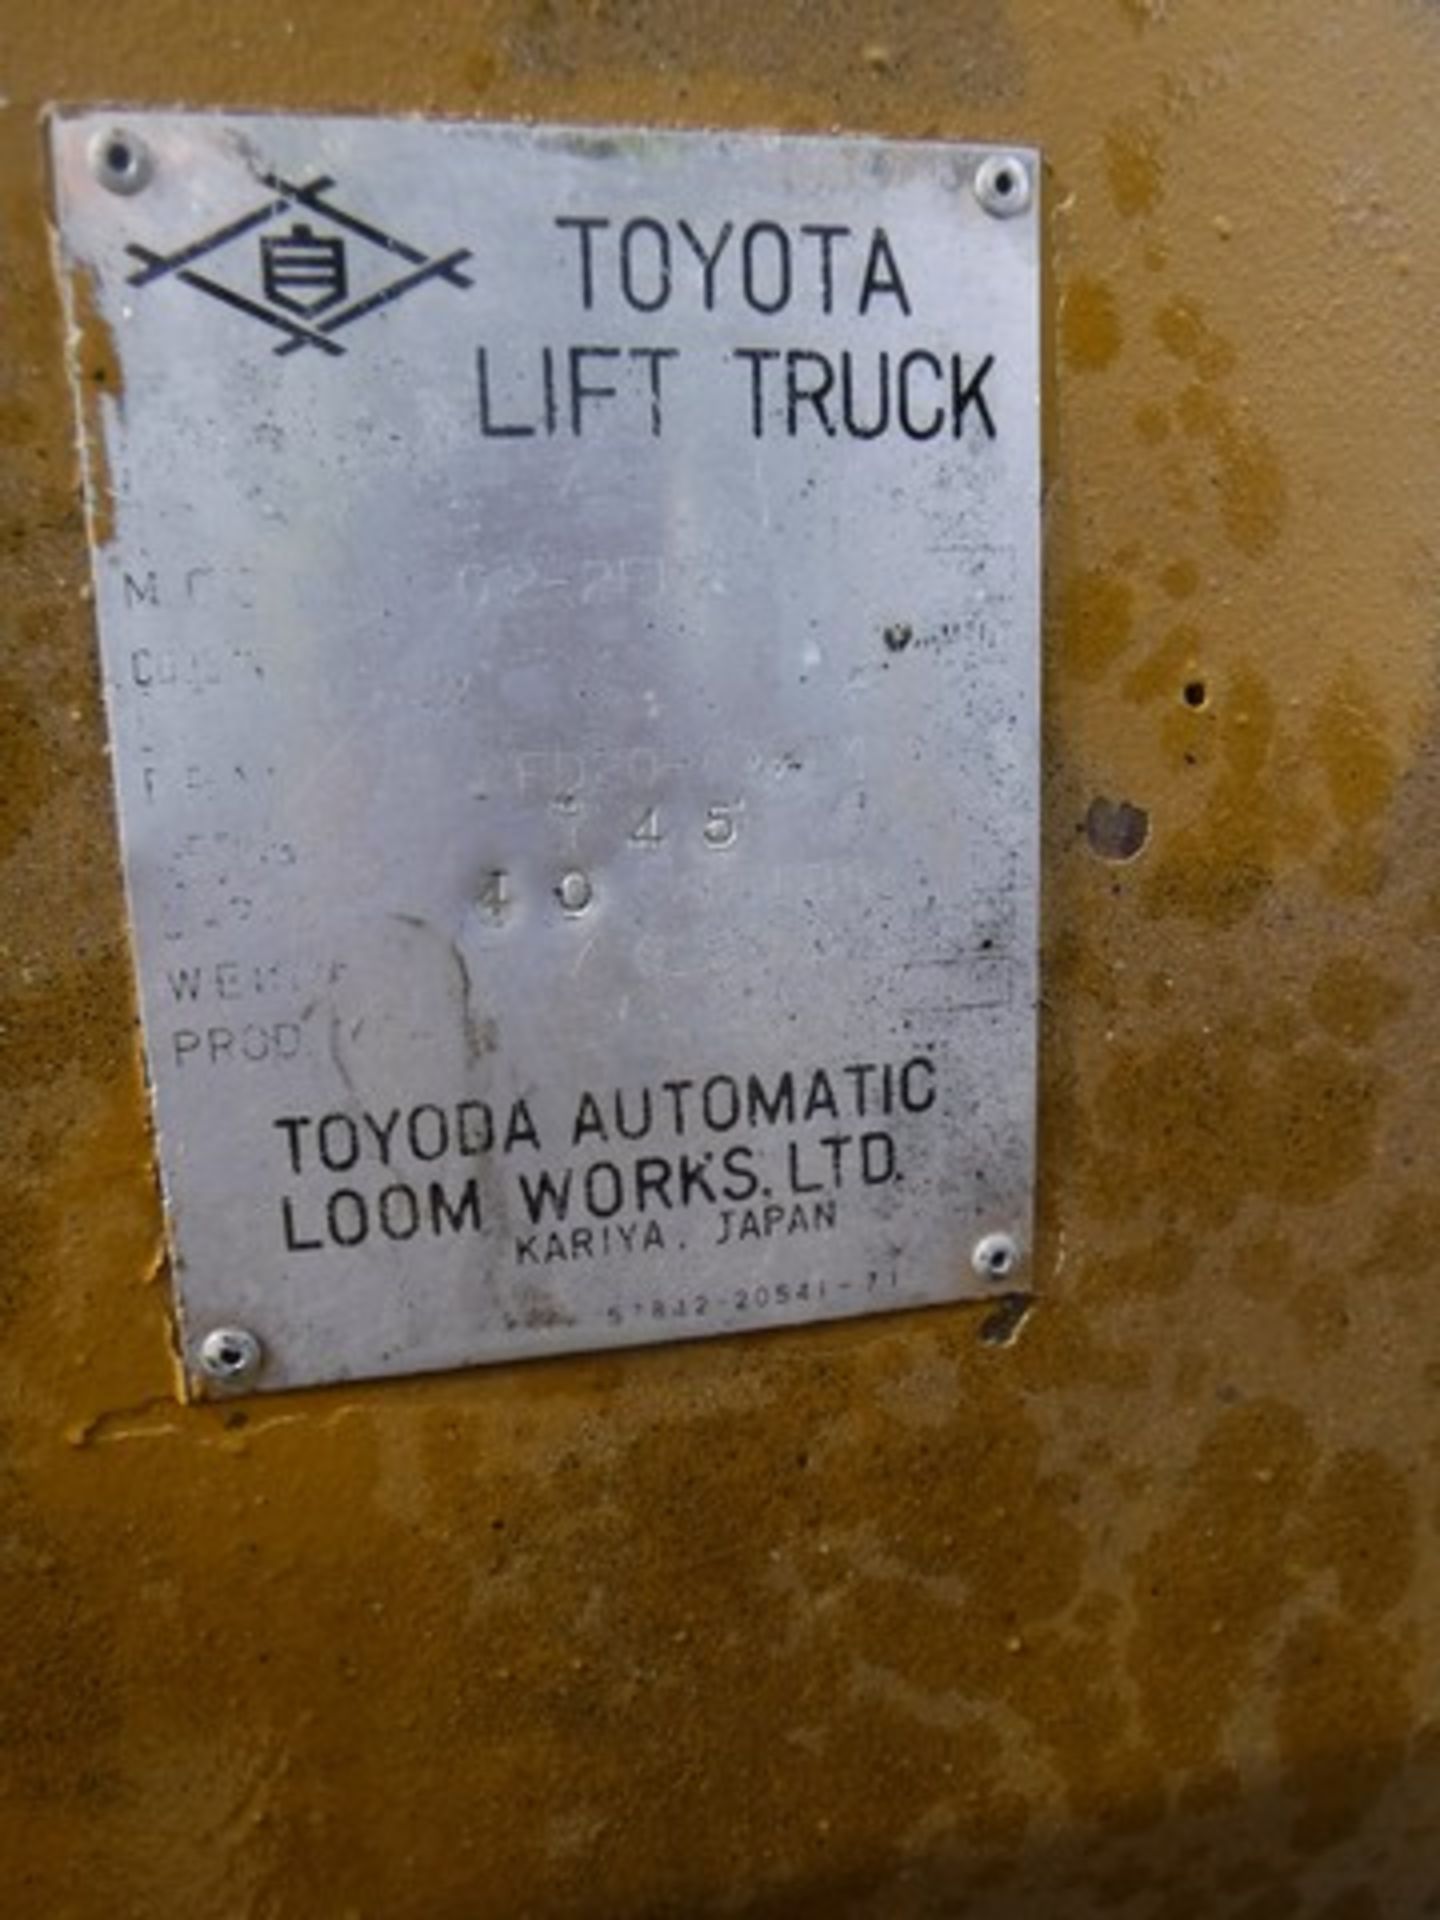 TOYOTA diesel forklift, 285hrs (not verified) - Image 3 of 12